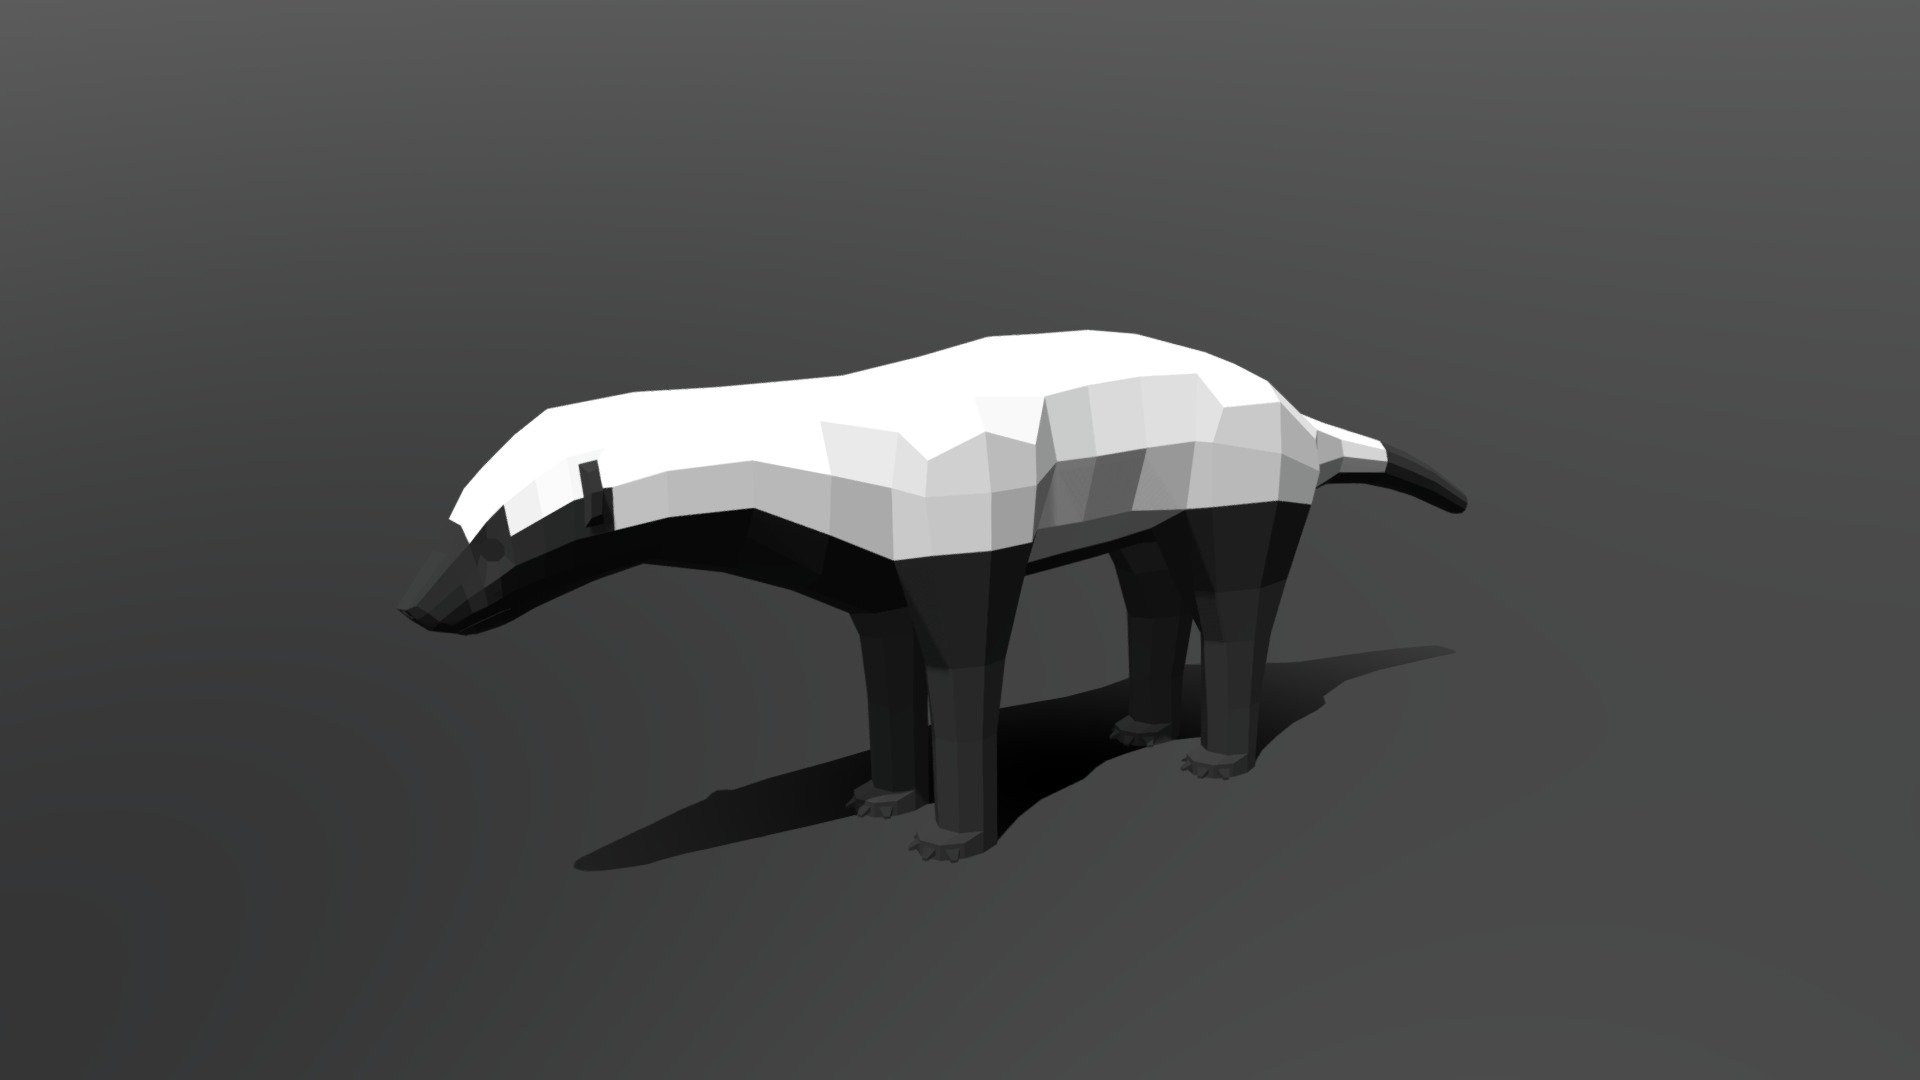 This is a low poly 3D model of a Honey Badger. The low poly Honey Badger was modeled and prepared for low-poly style renderings, background, general CG visualization presented as a mesh with quads only.

Verts : 792 Faces: 792

The 3D model have simple materials with diffuse colors.

No ring, maps and no UVW mapping is available.

The original file was created in blender. You will receive a 3DS, OBJ, FBX, blend, DAE, Stl.

All preview images were rendered with Blender Cycles. Product is ready to render out-of-the-box. Please note that the lights, cameras, and background is only included in the .blend file. The model is clean and alone in the other provided files, centred at origin and has real-world scale 3d model